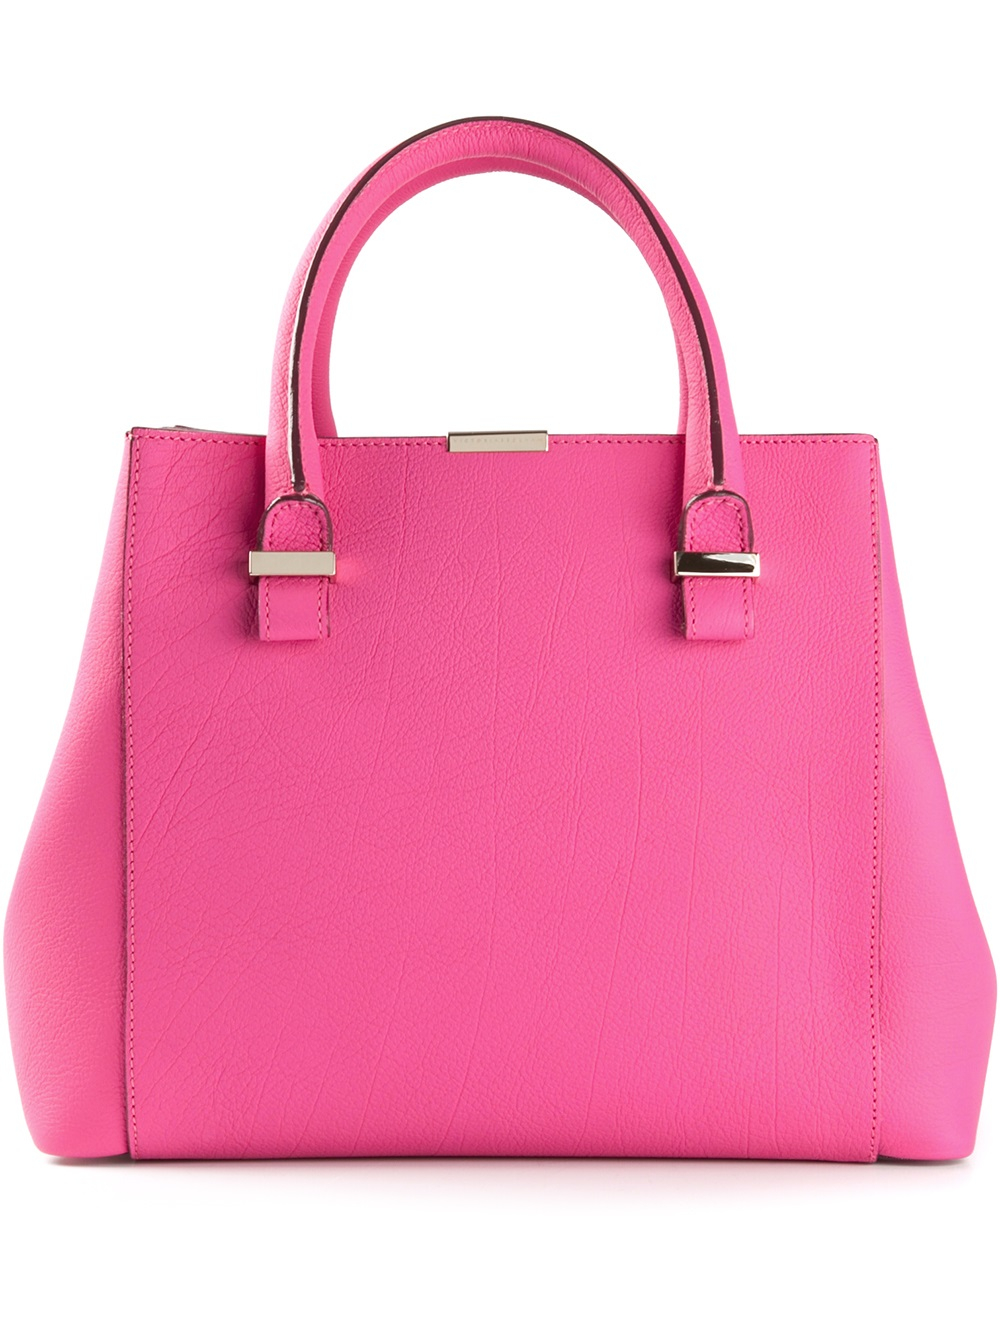 Victoria beckham Quincy Tote Bag in Pink | Lyst